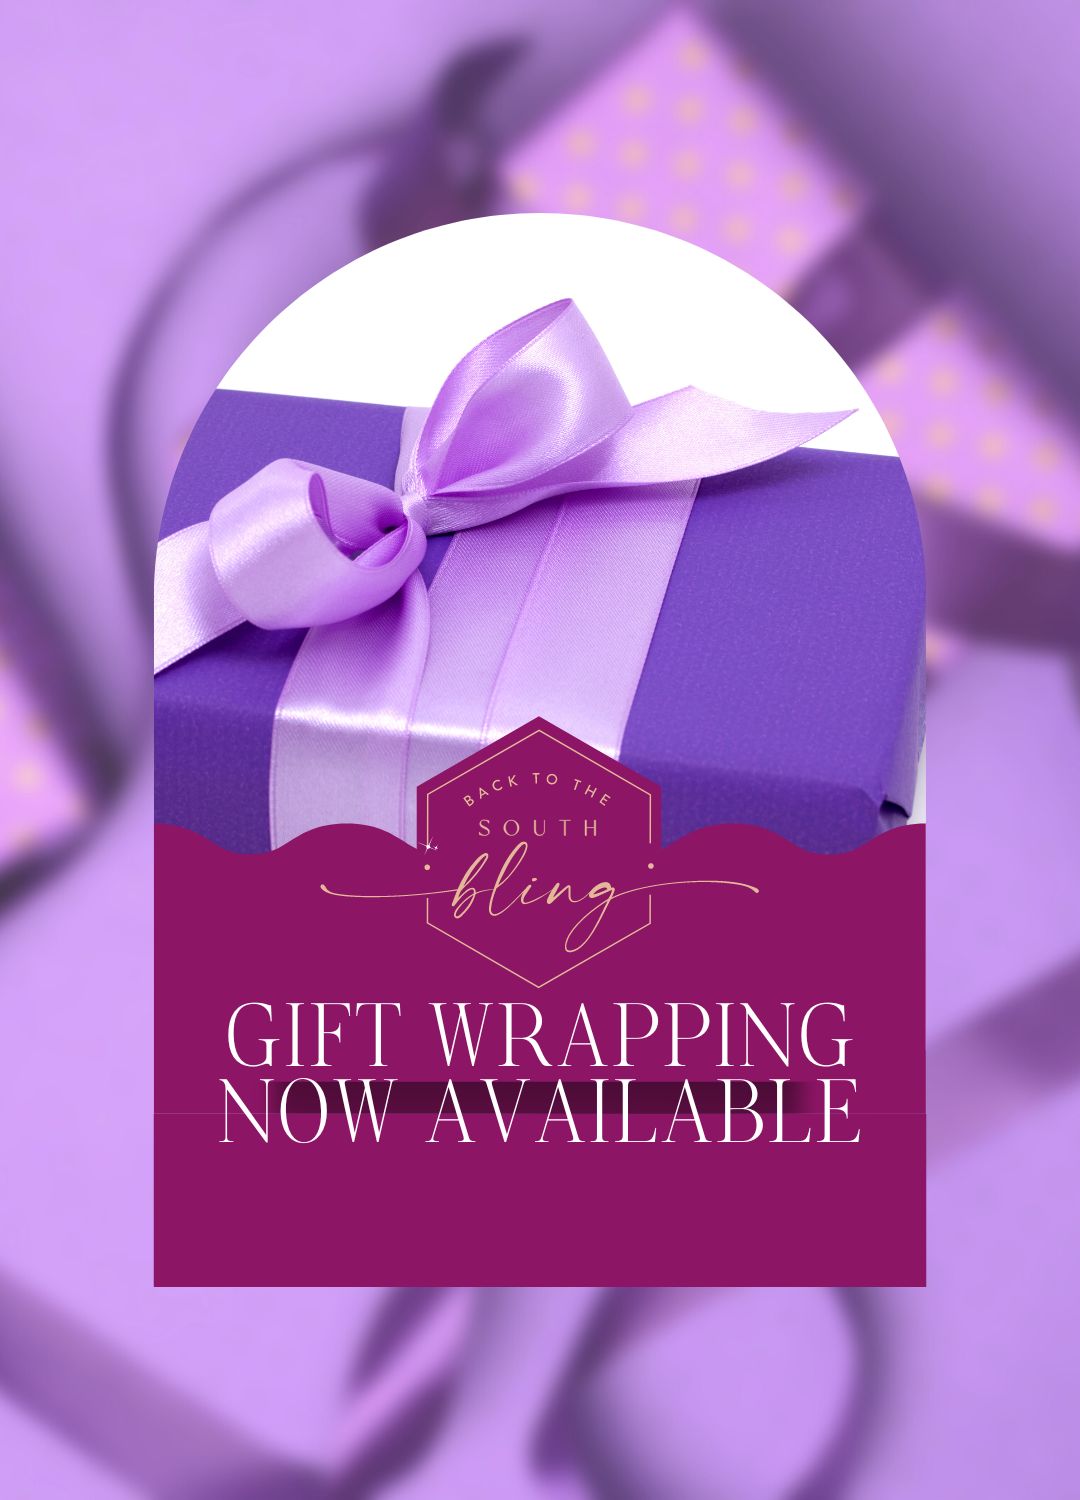 Gift Wrapping Now Available at Back to the South Bling